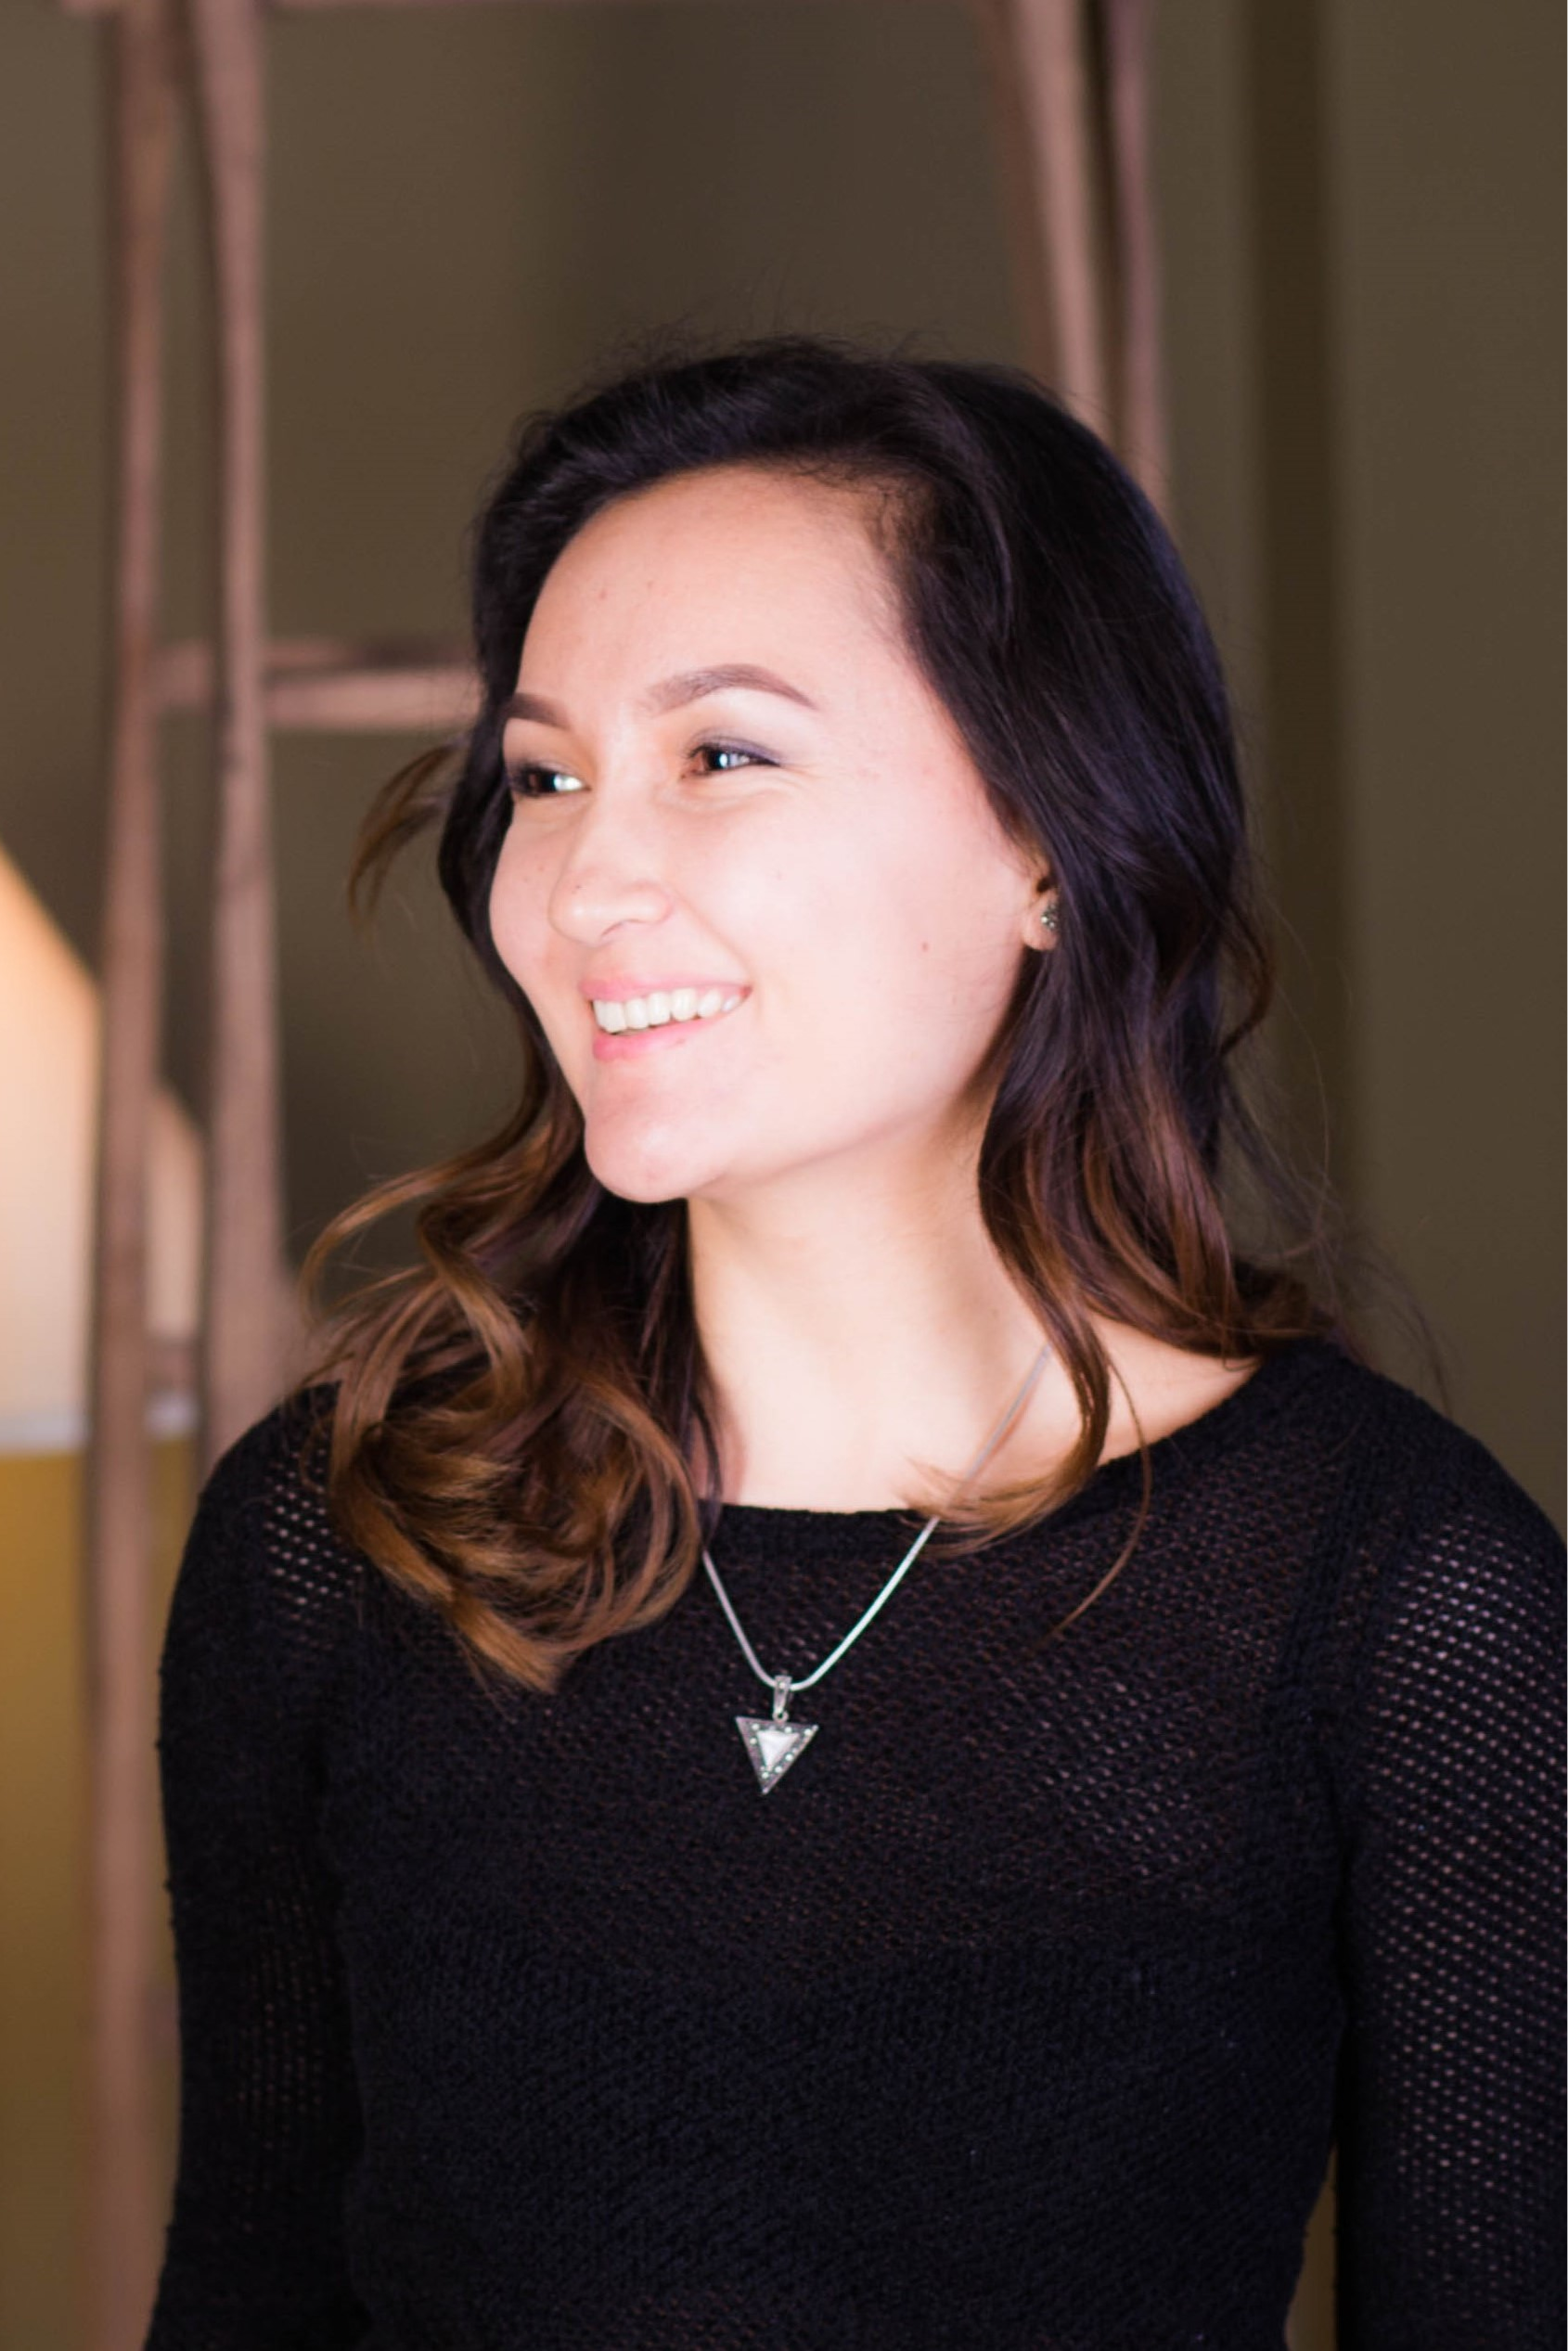 Photo of Aizhan Tilenbaeva. Aizhan is smiling and looking to the side. She is wearing a black sweater. 